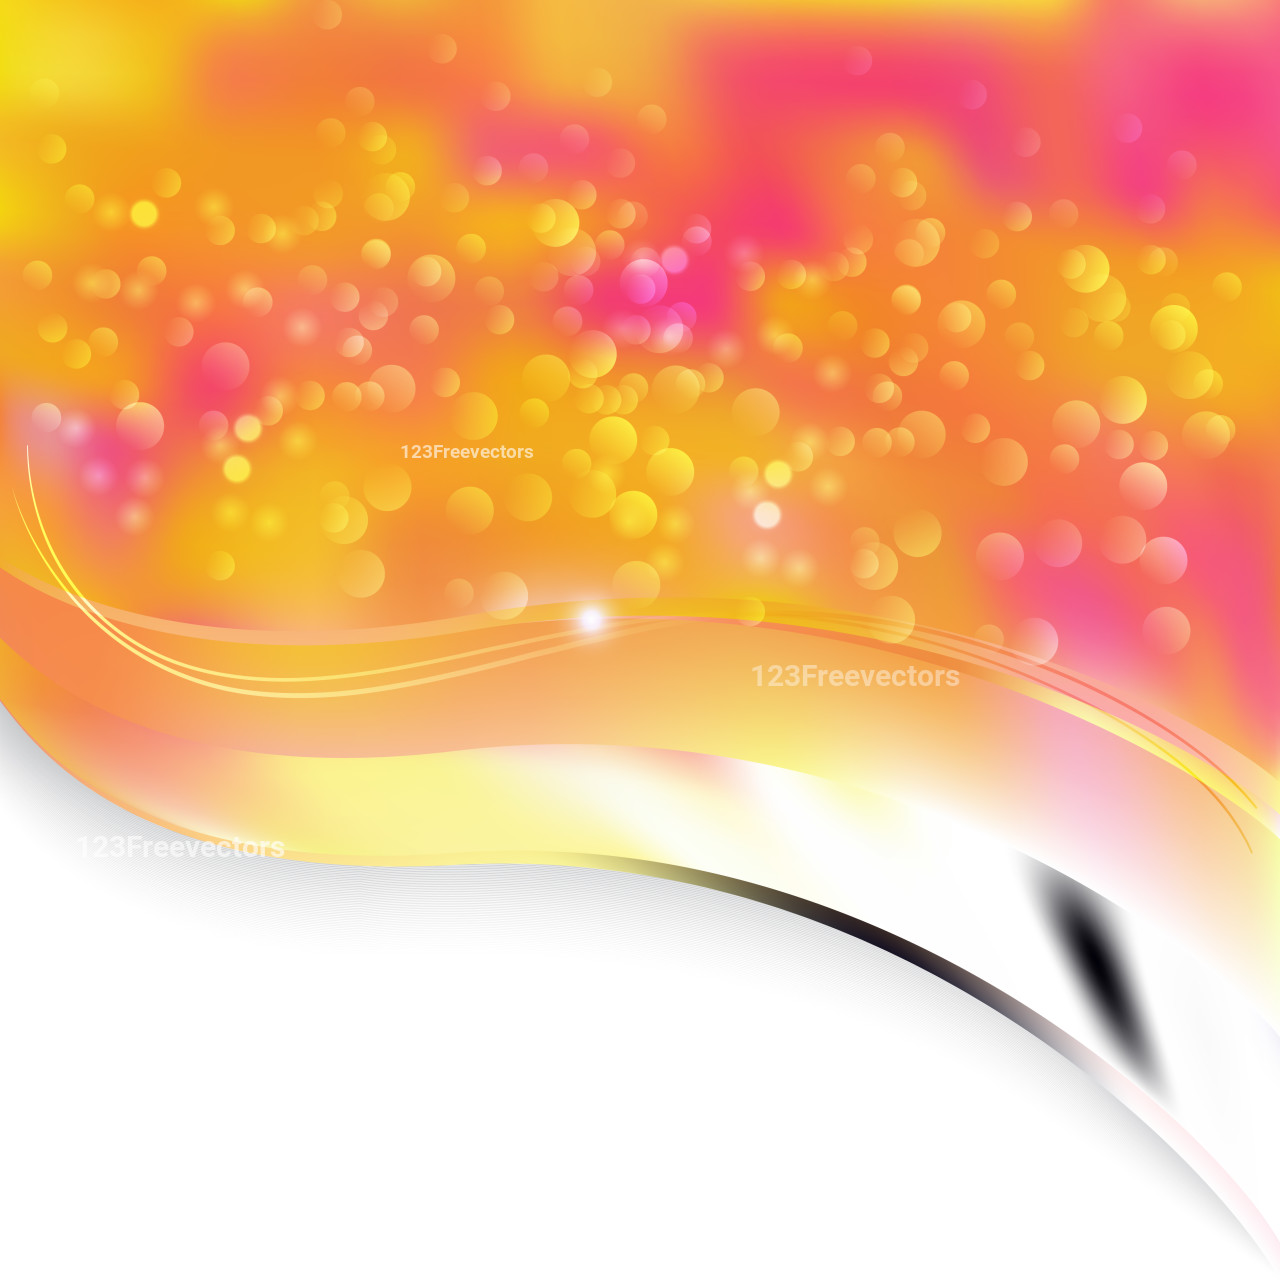 Abstract Orange Pink and White Wave Folder Background Image